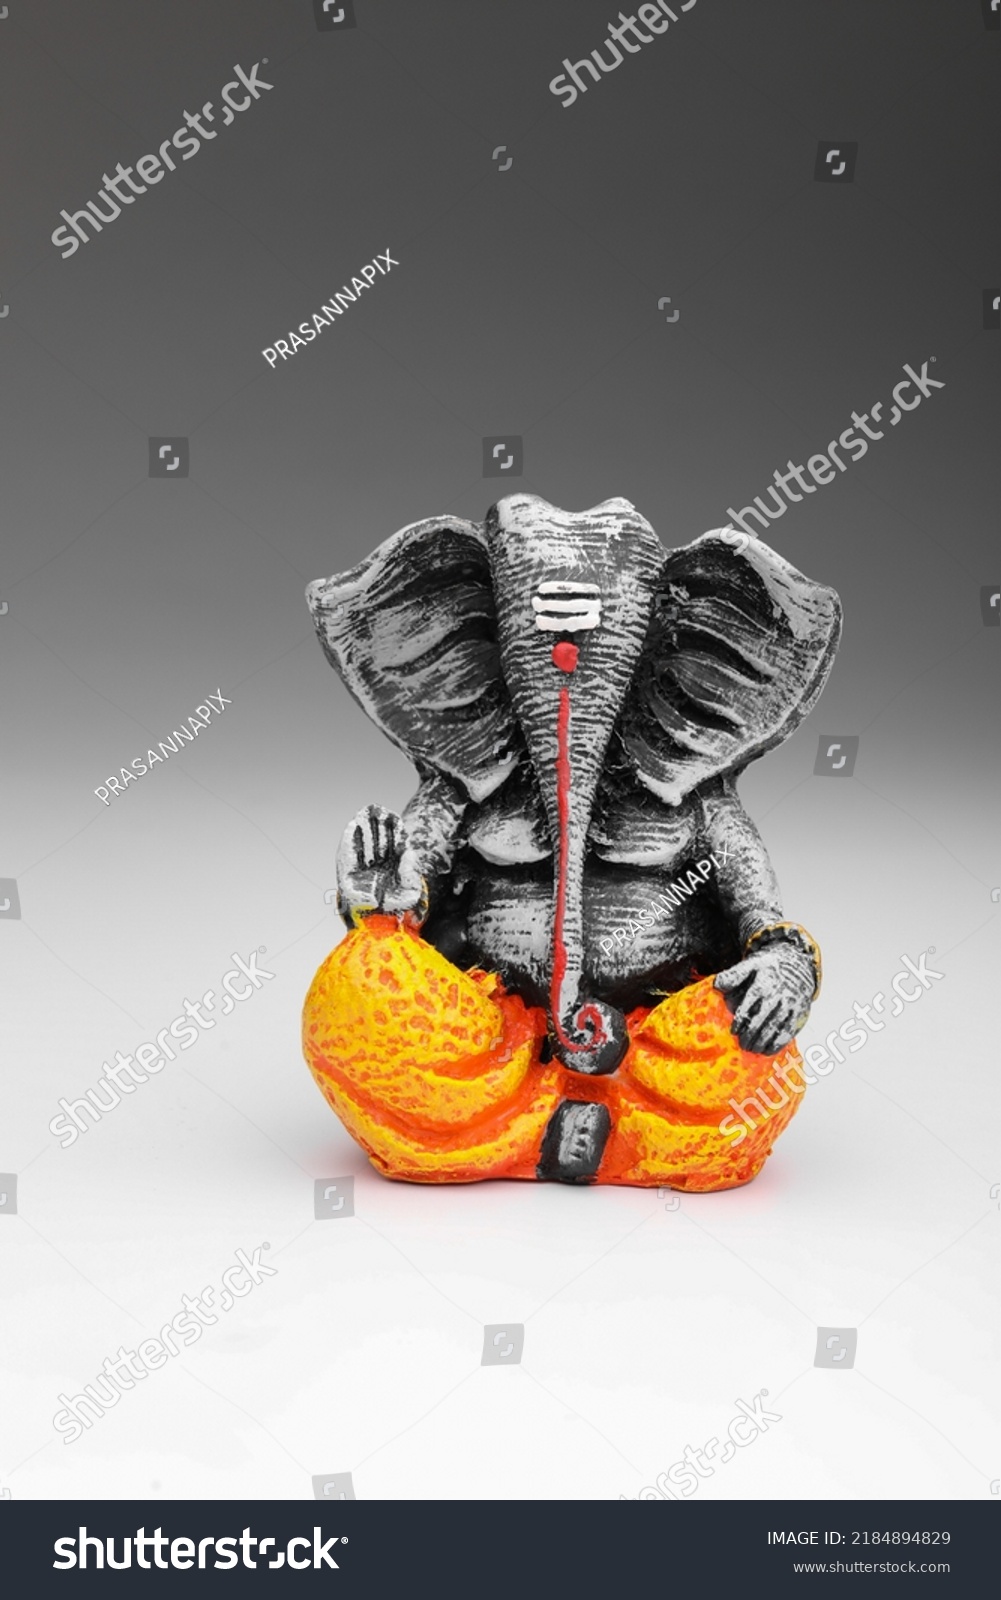 antique lord ganesha sculpture on white background. #2184894829